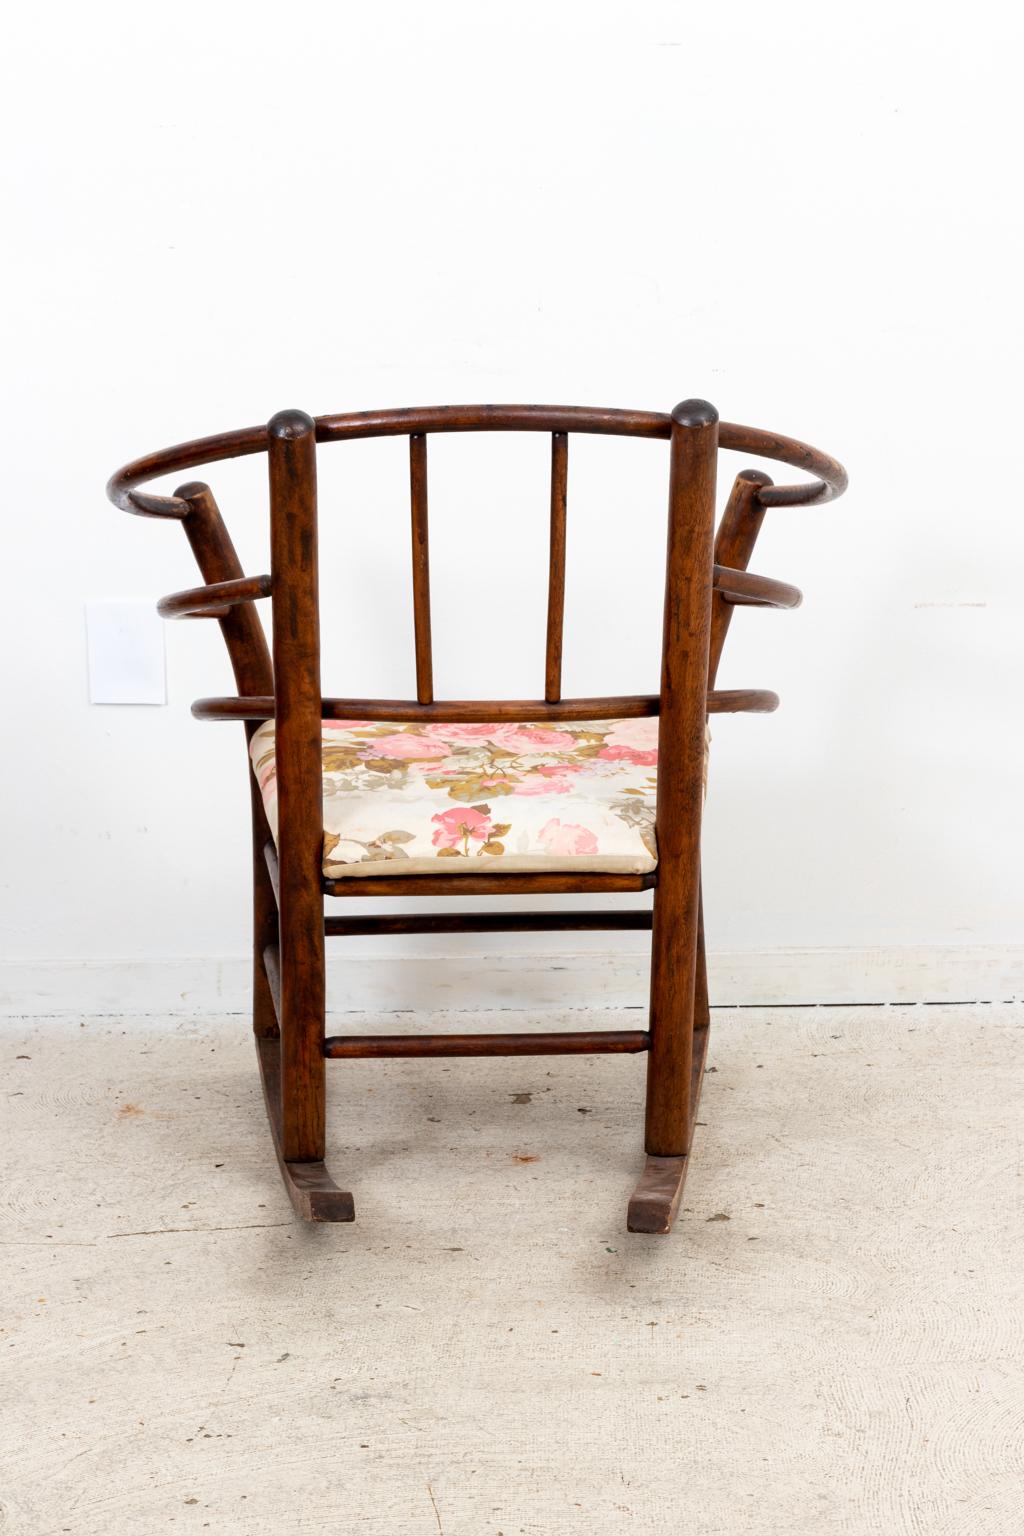 Circa early 20th century vintage bentwood rocking chair with curved seat back, floral seat cushion, and box stretcher on the base. The piece was most likely manufactured by the Hickory Chair Company. Made in the United States. Please note of wear